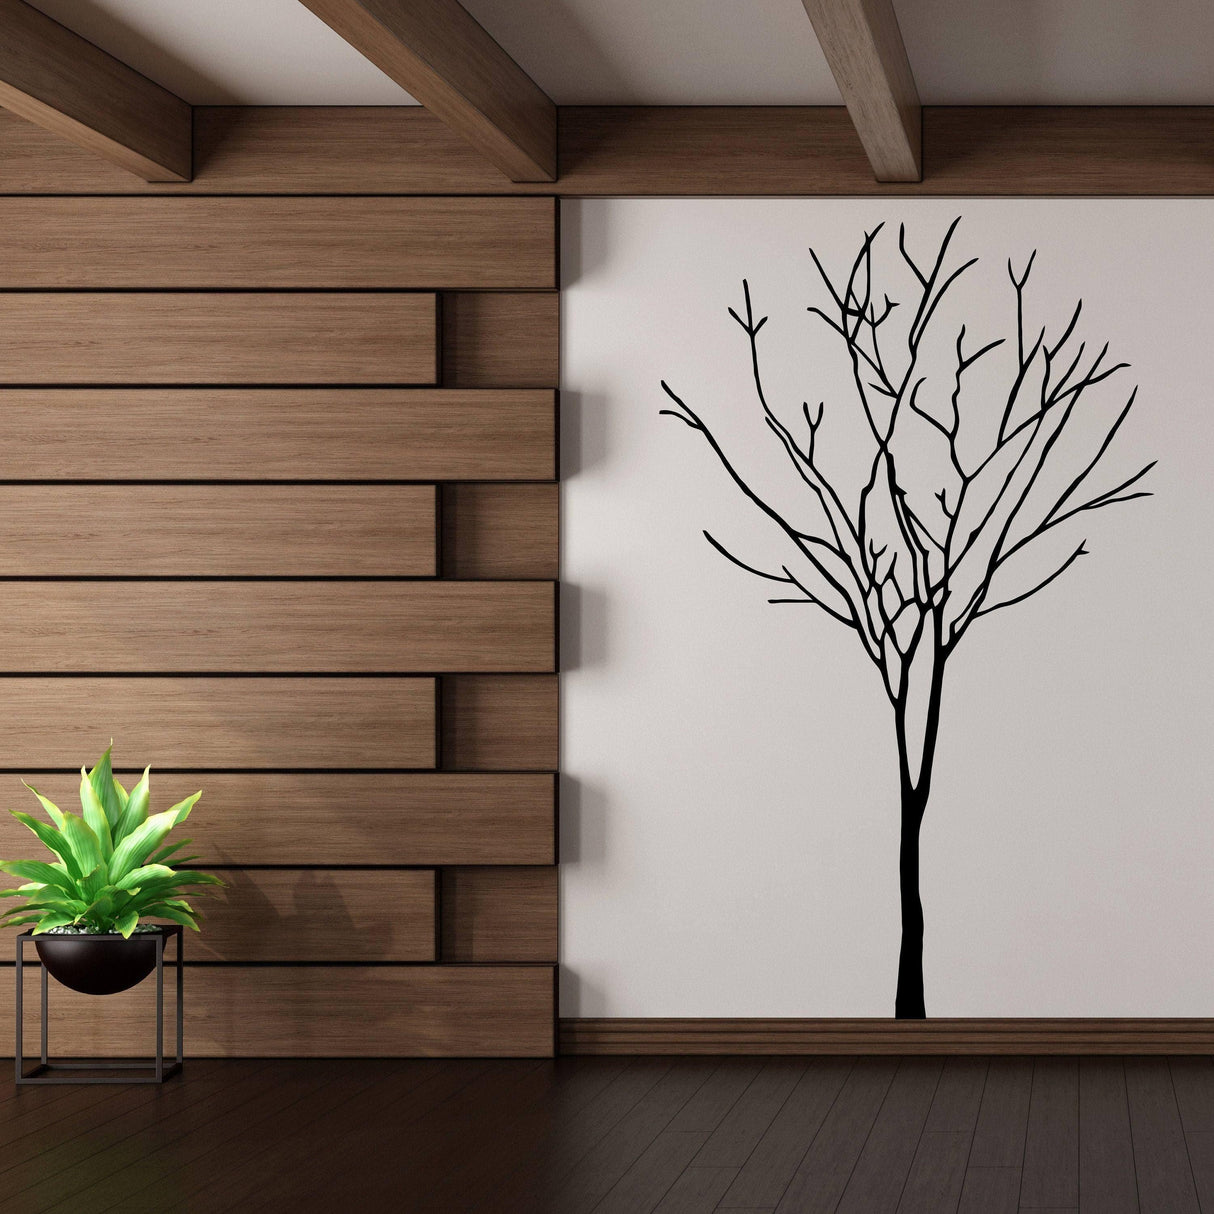 Tree Wall Decal Sticker - Birch Art Vinyl Nursery Stickers - Nature Botanical Trees Decals - Forest Decor Natural Big Leaf Peel and Stick 39 x 28